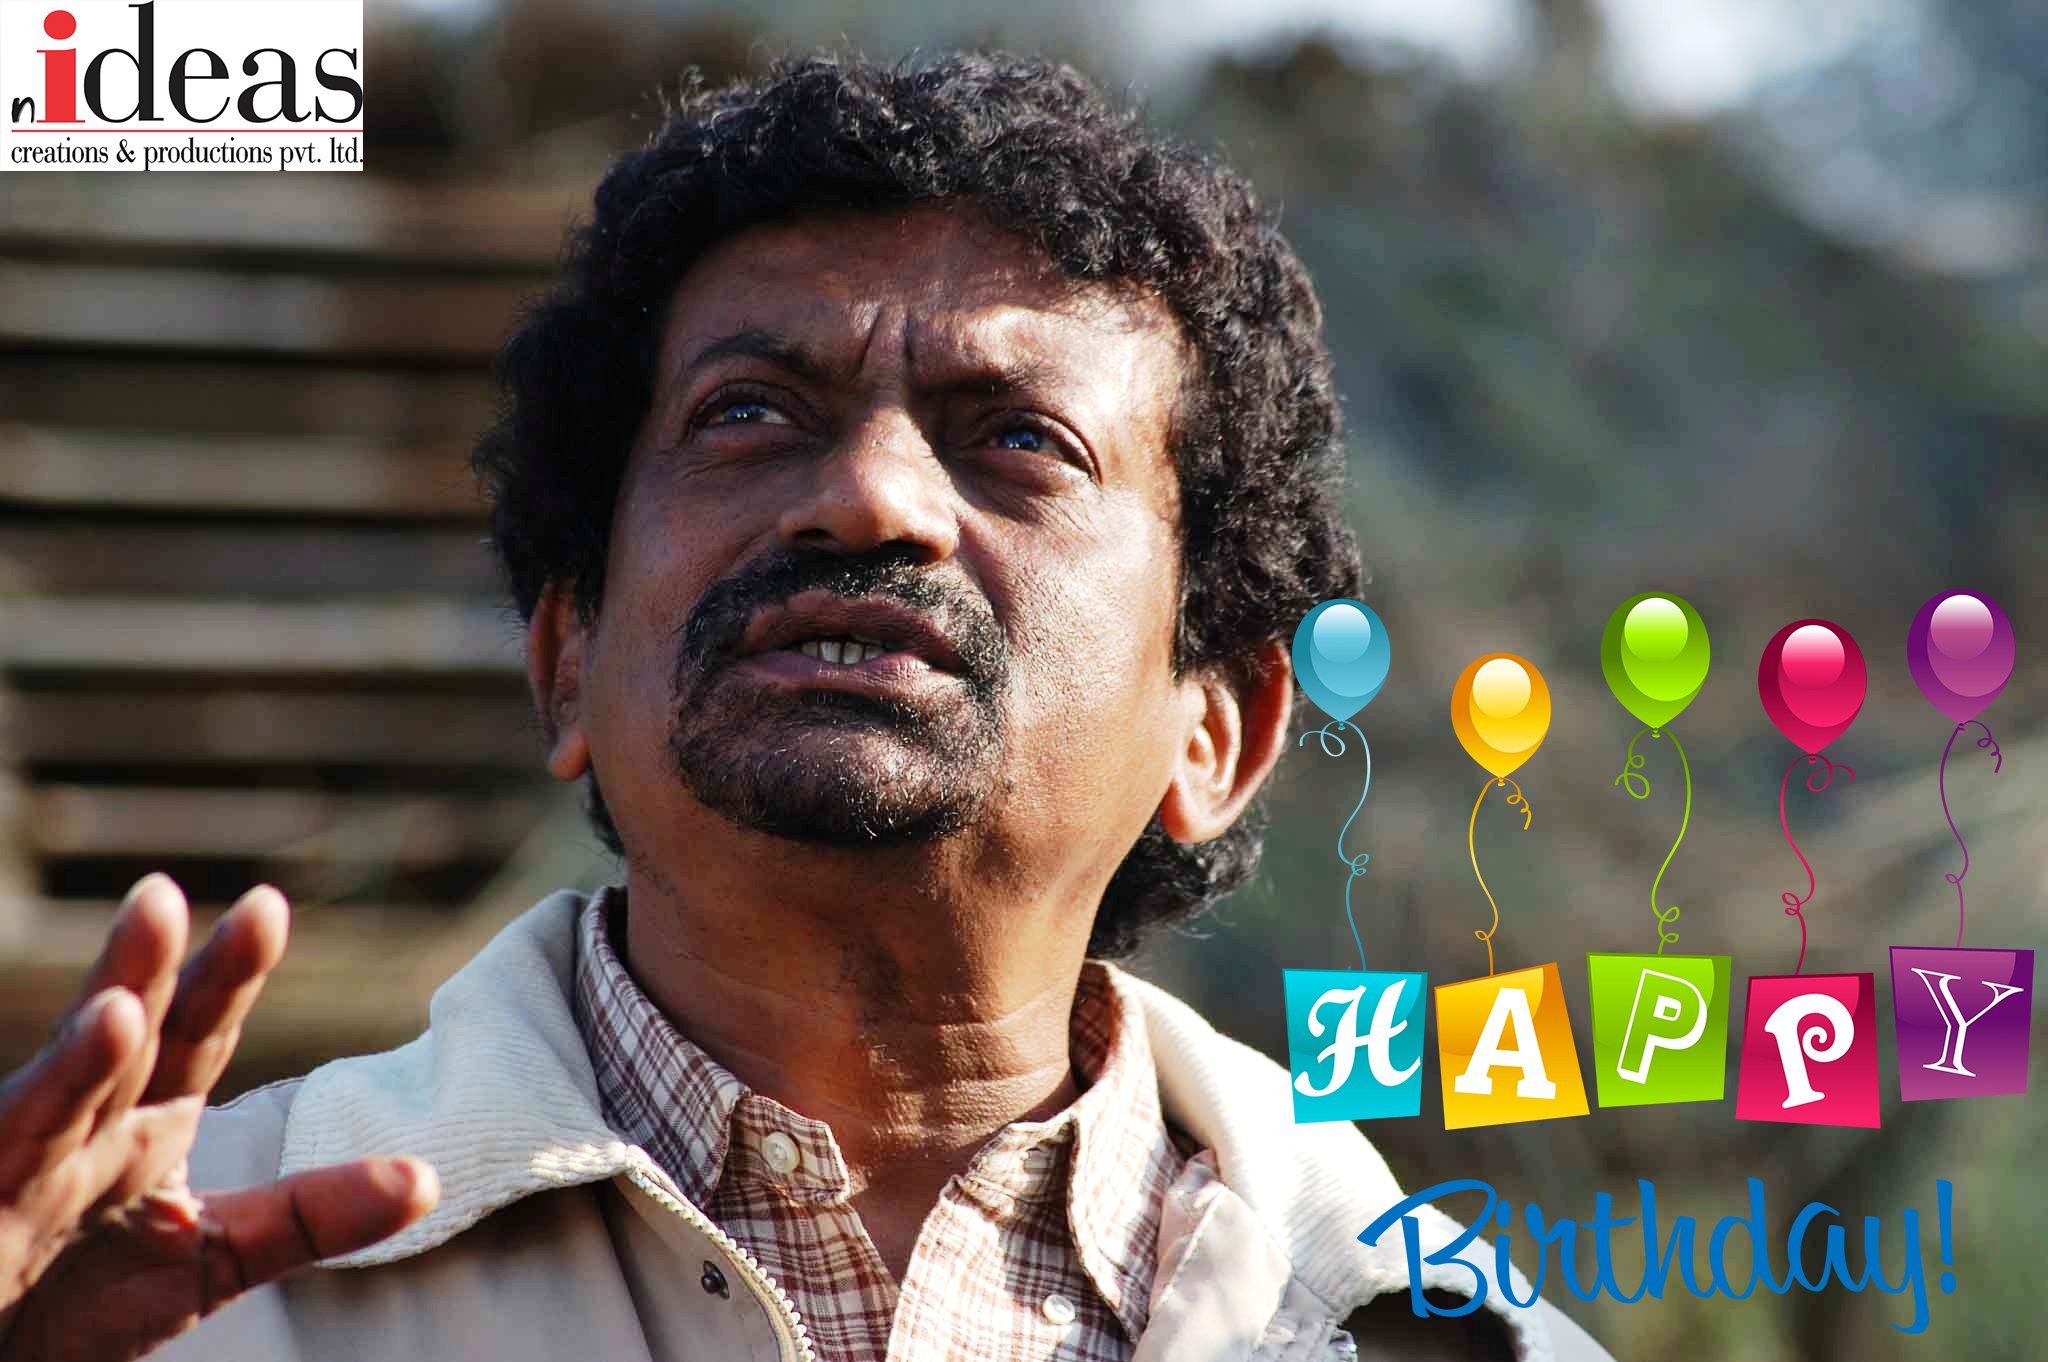 Wishing the legendary director Goutam Ghose a very happy birthday. Many many happy returns of the day sir 